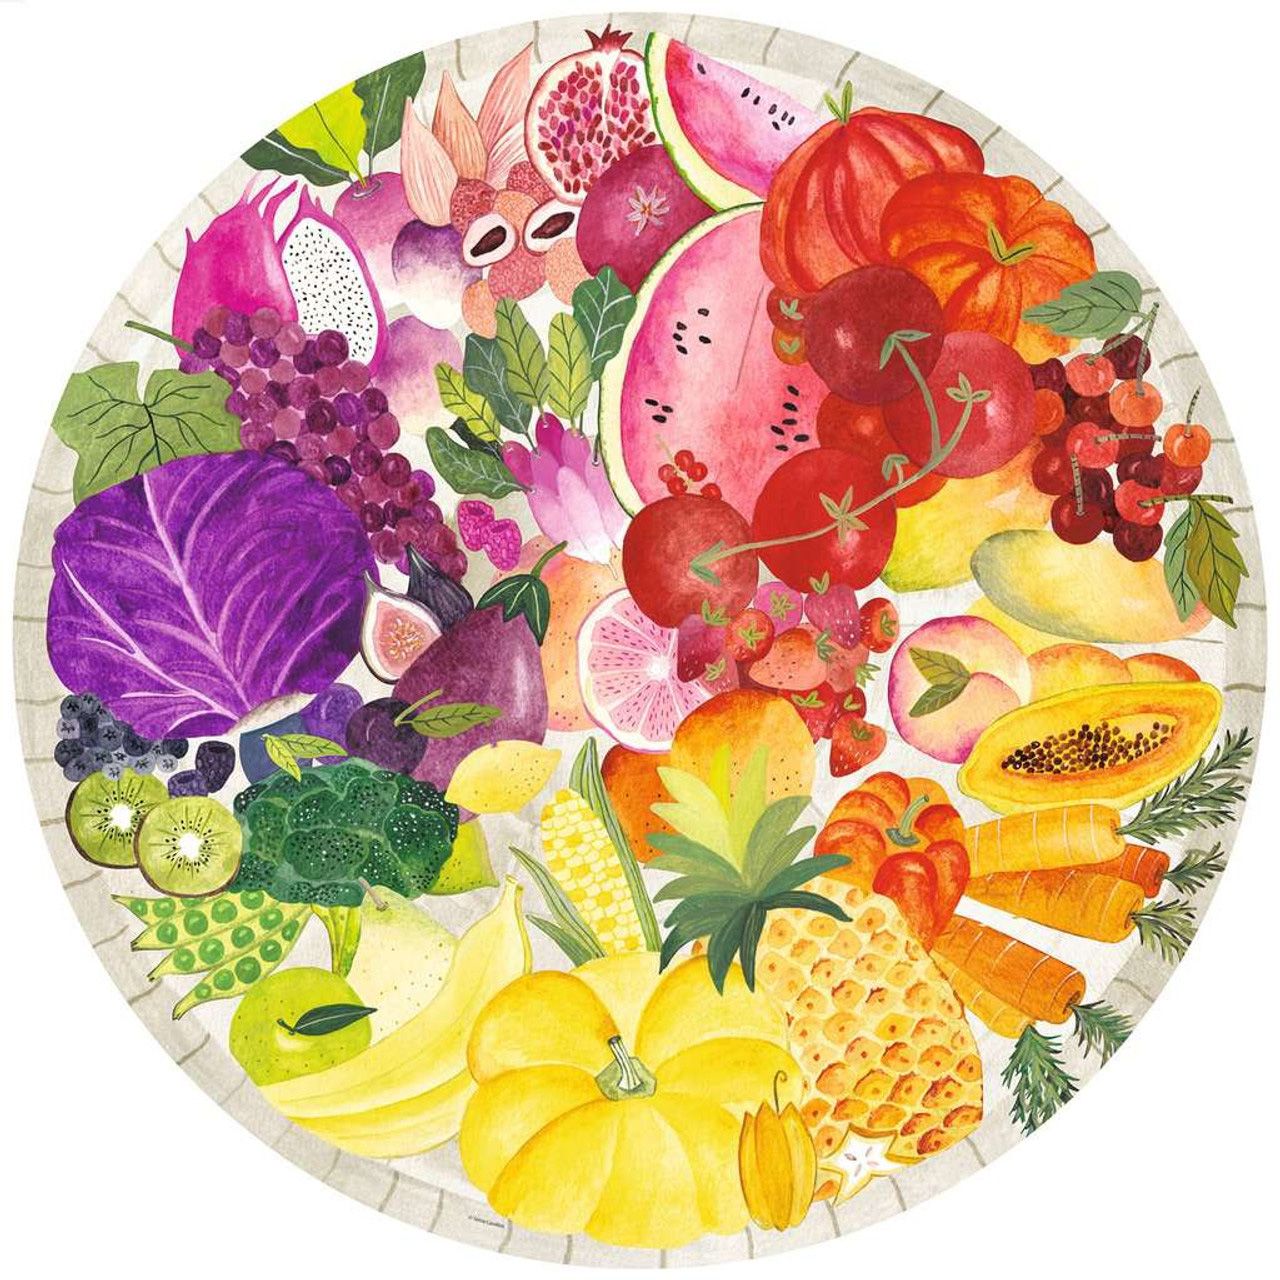 Fruits and Vegetables Mother's Day Jigsaw Puzzle